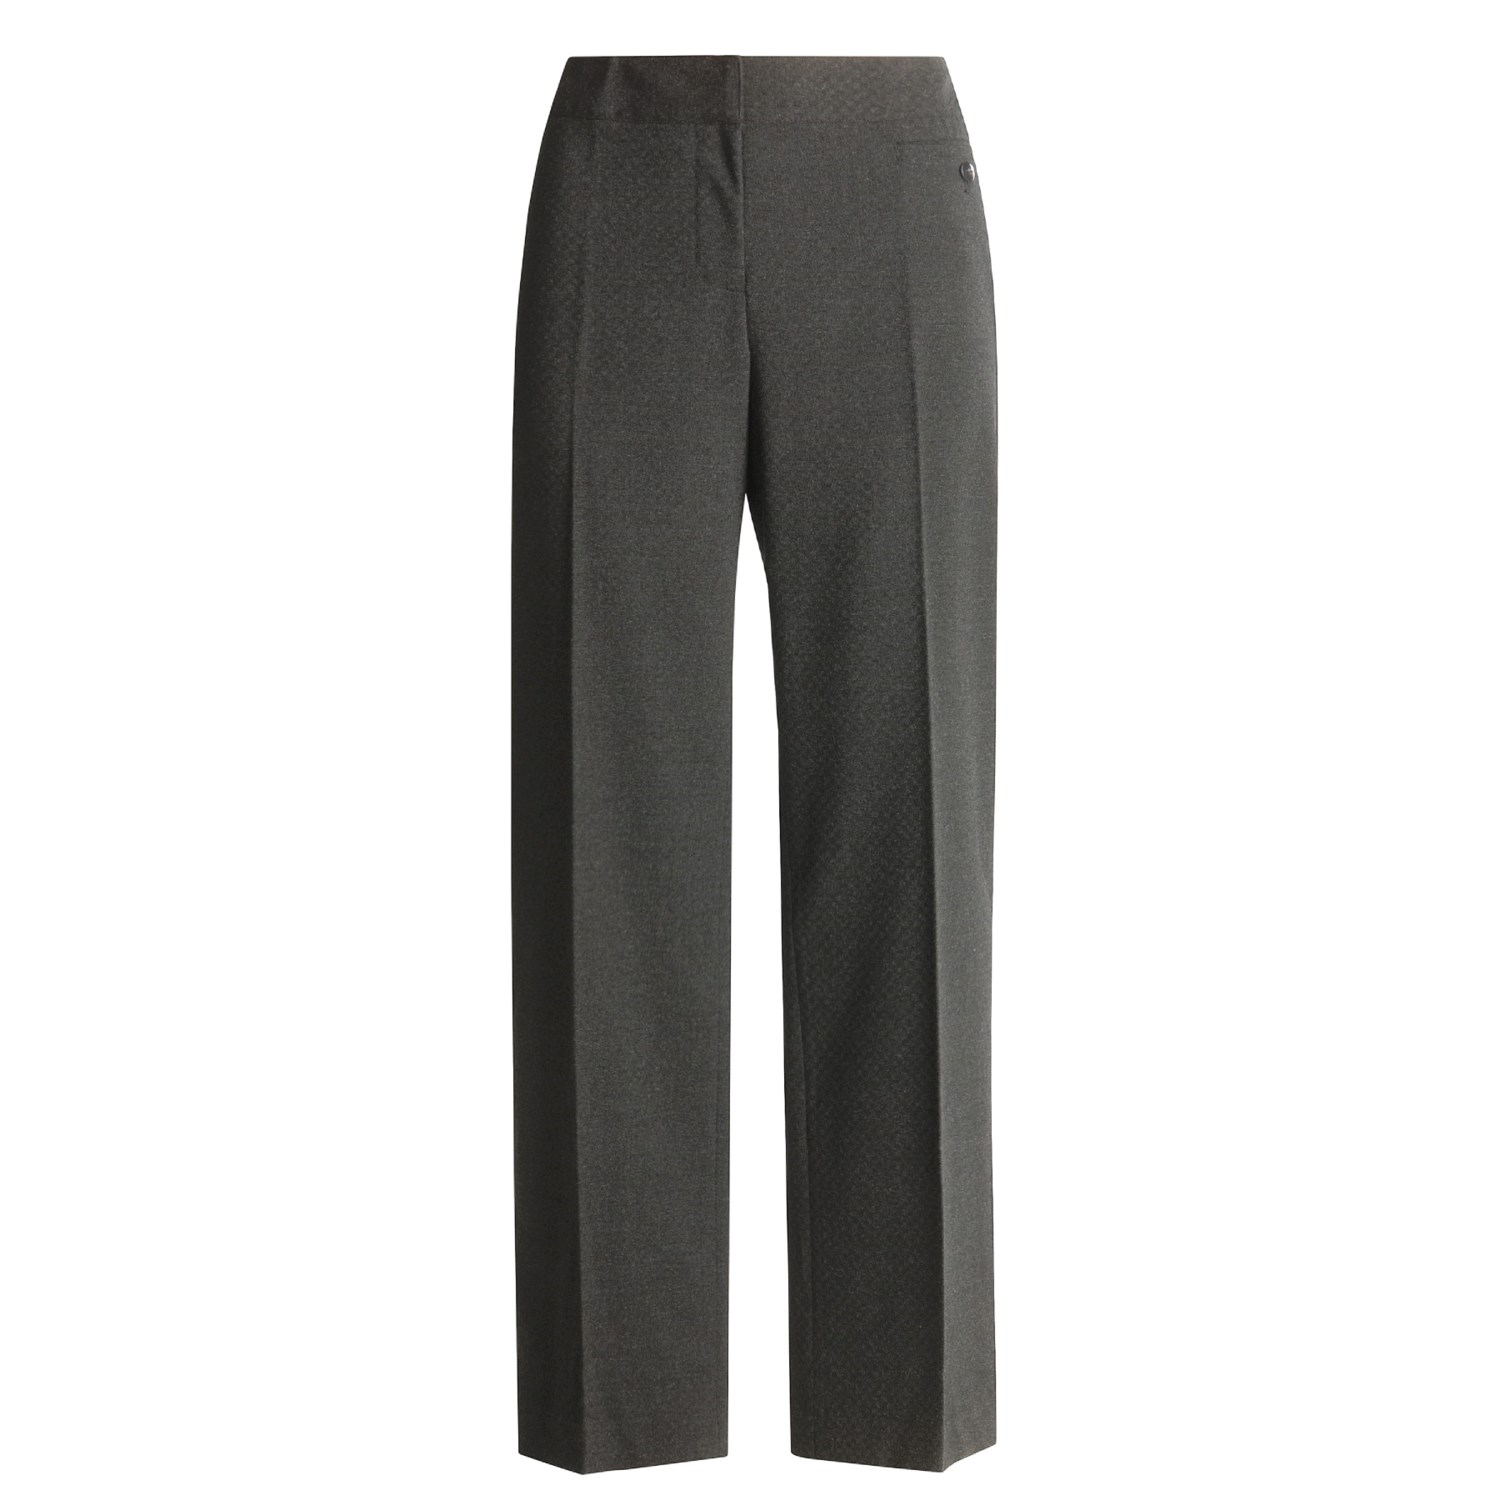 Atelier Luster Pants (For Women) 1978G - Save 54%